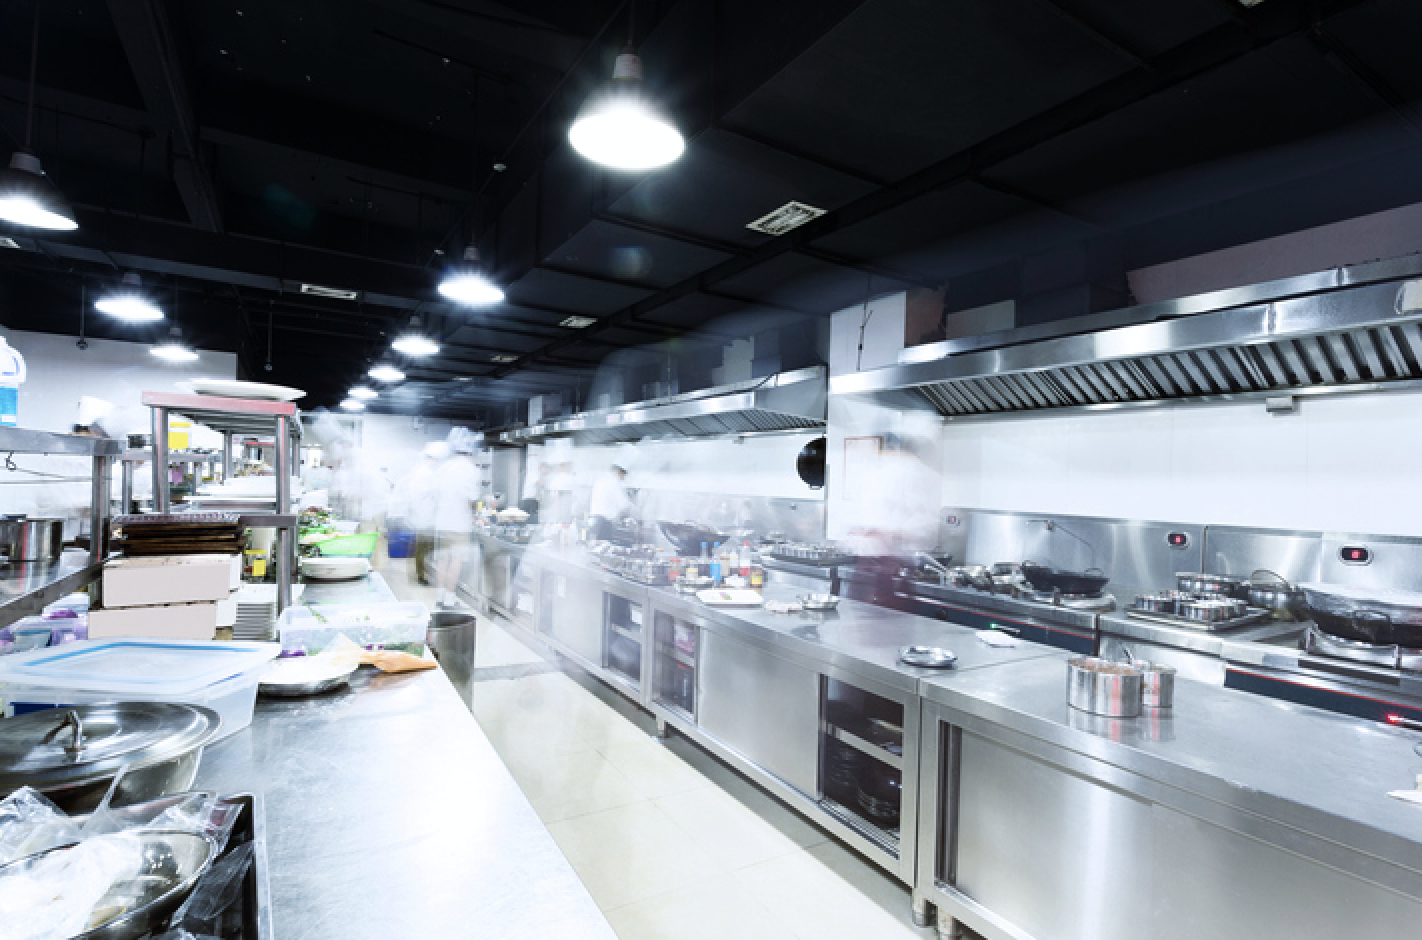 Why Purchase Used Restaurant Equipment? Insights from a Used Restaurant Equipment Supplier in Aurora, Illinois